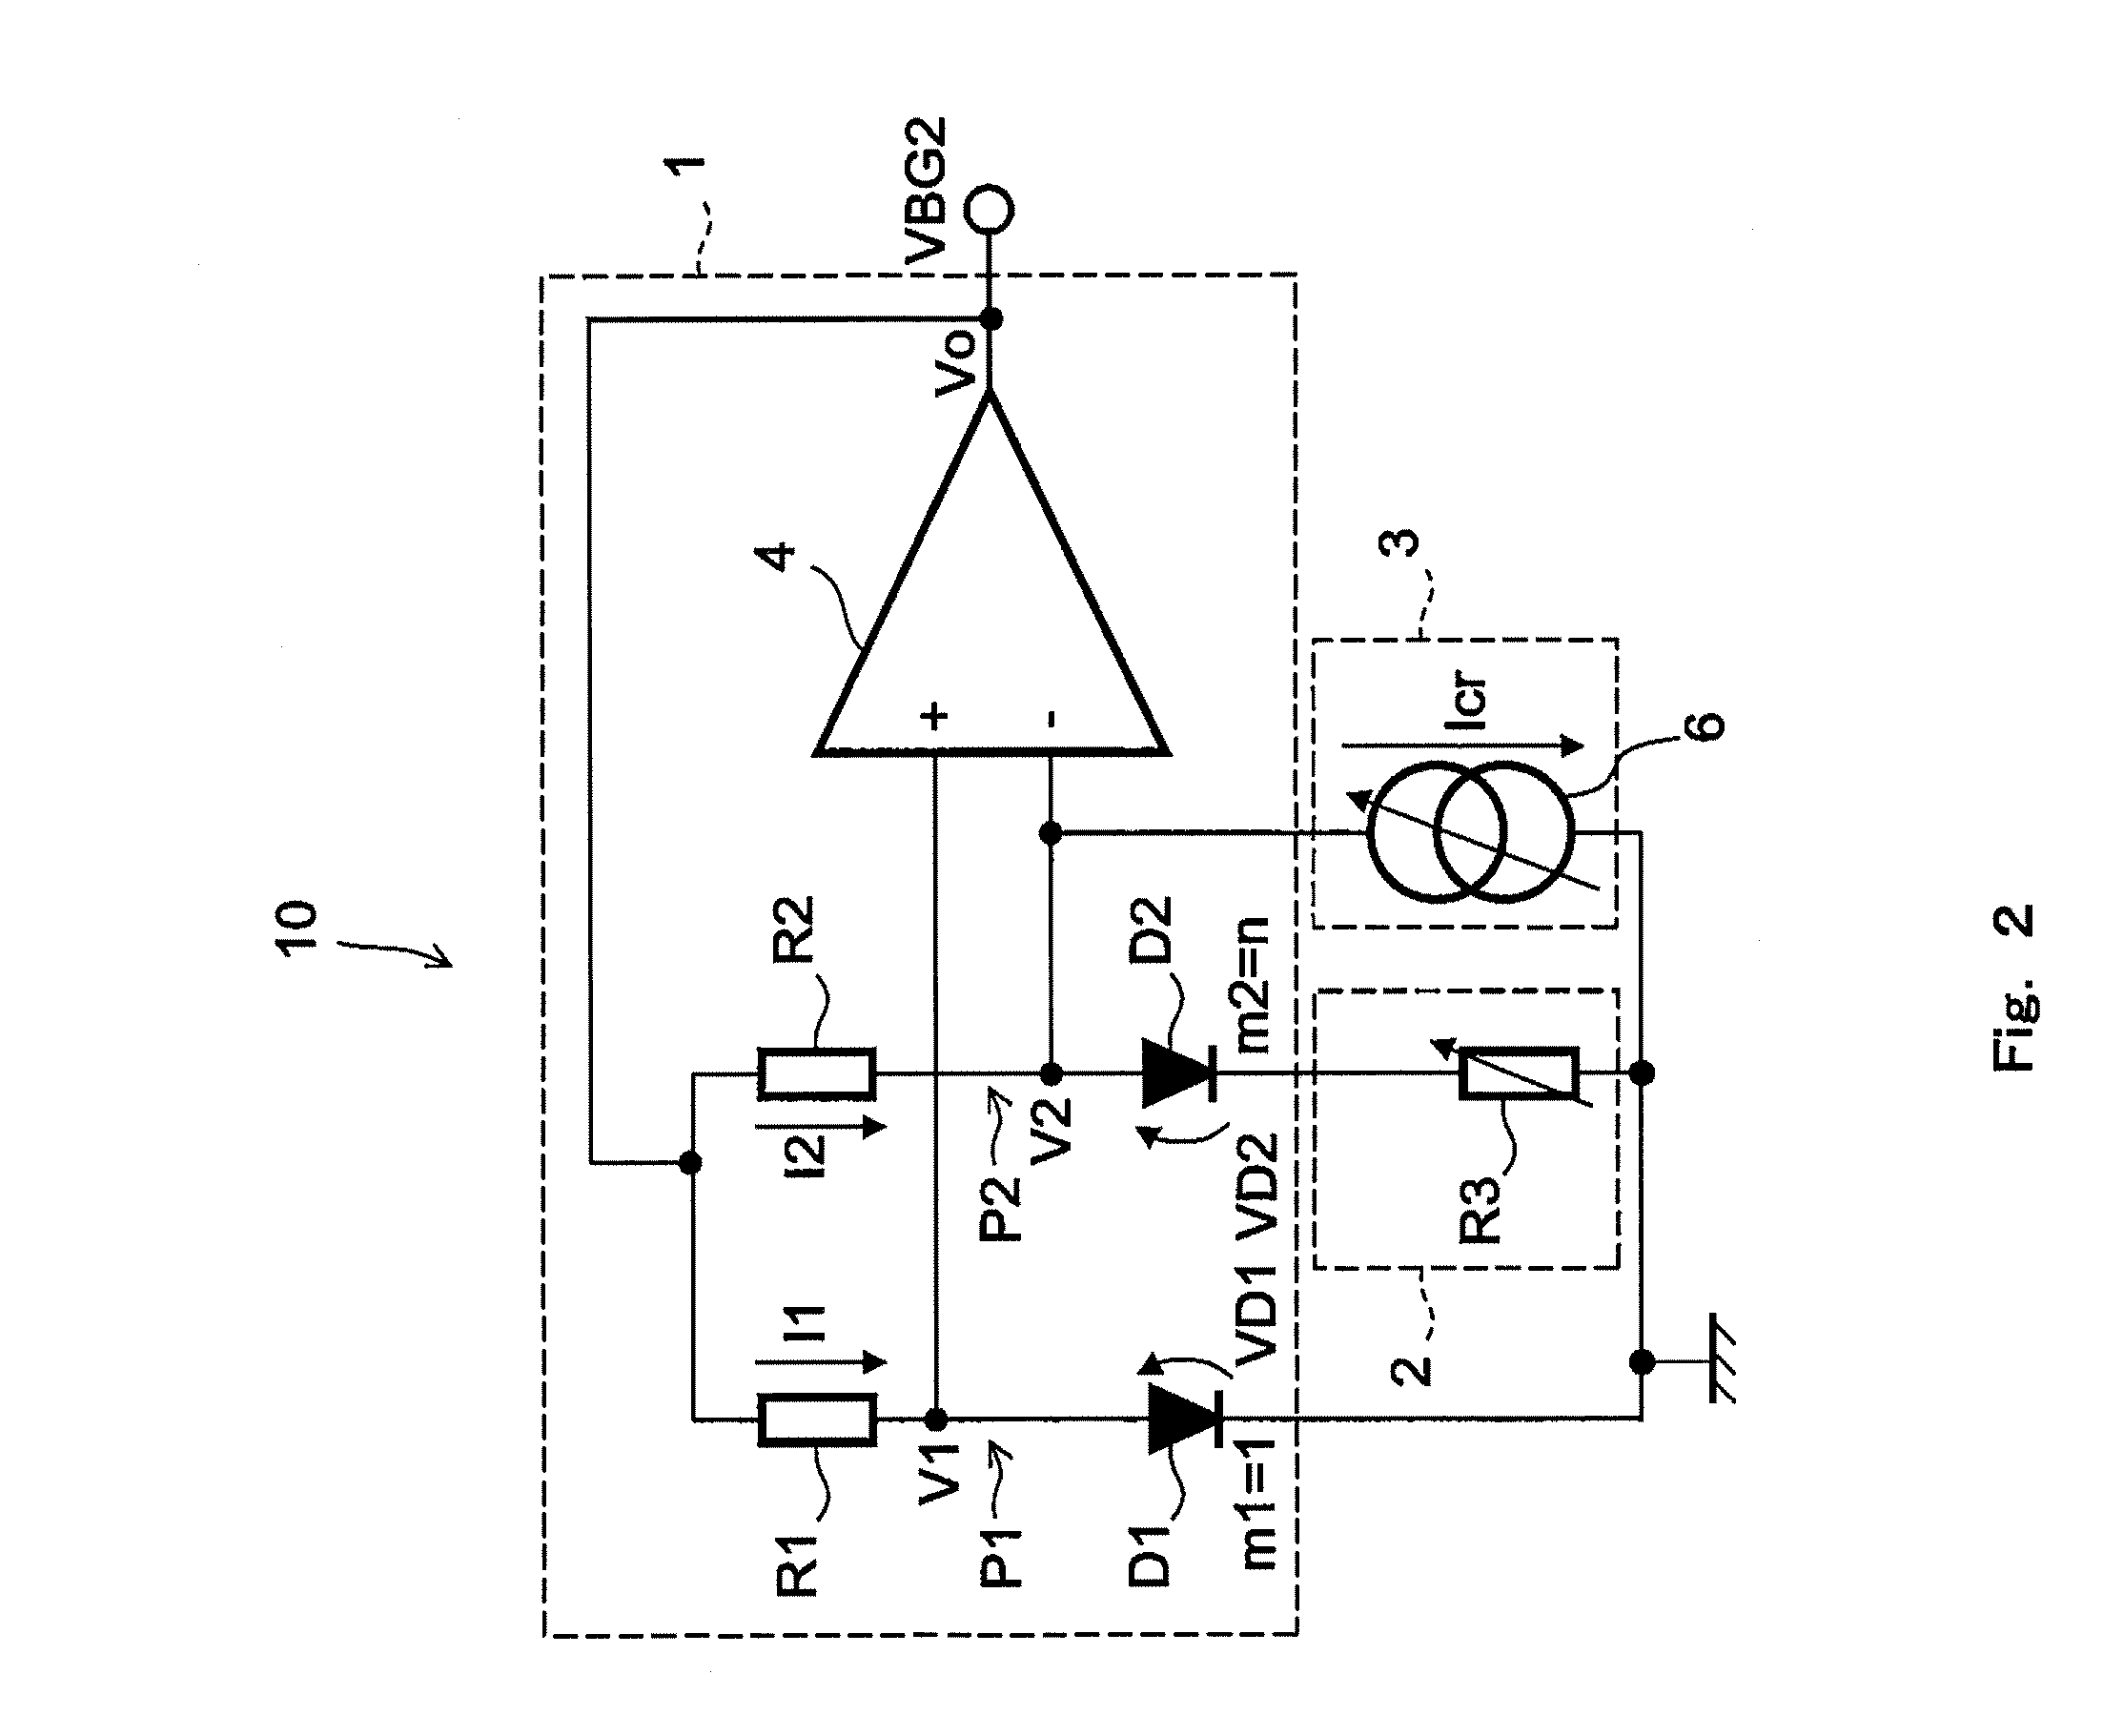 Reference voltage generating circuit and reference voltage source